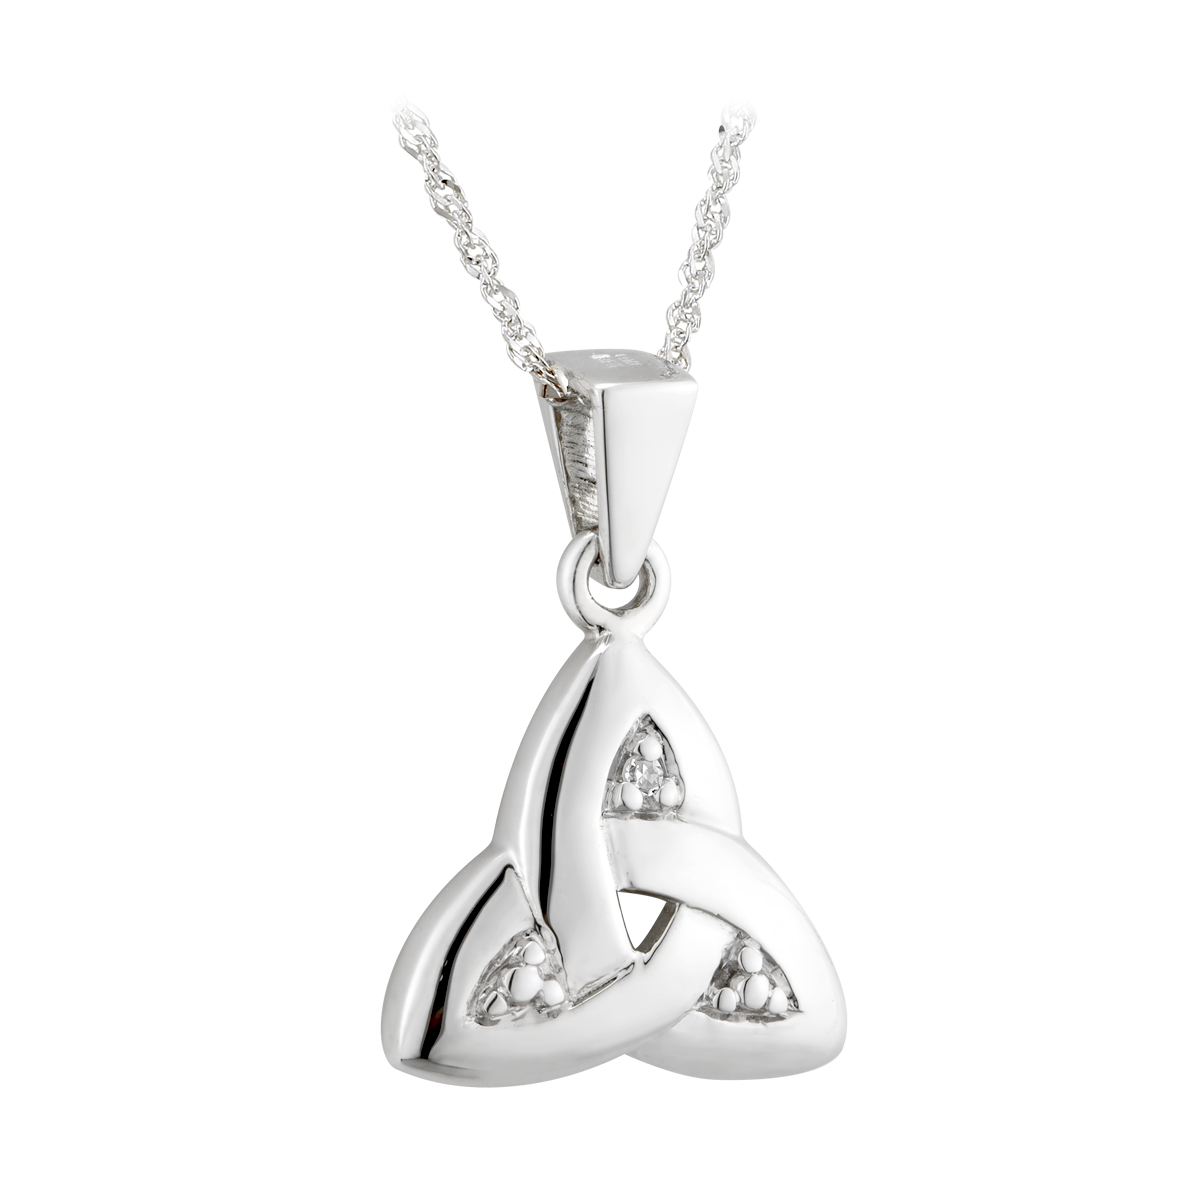 Product image for Celtic Pendant - 14k White Gold and Diamond Trinity Knot Pendant with Chain